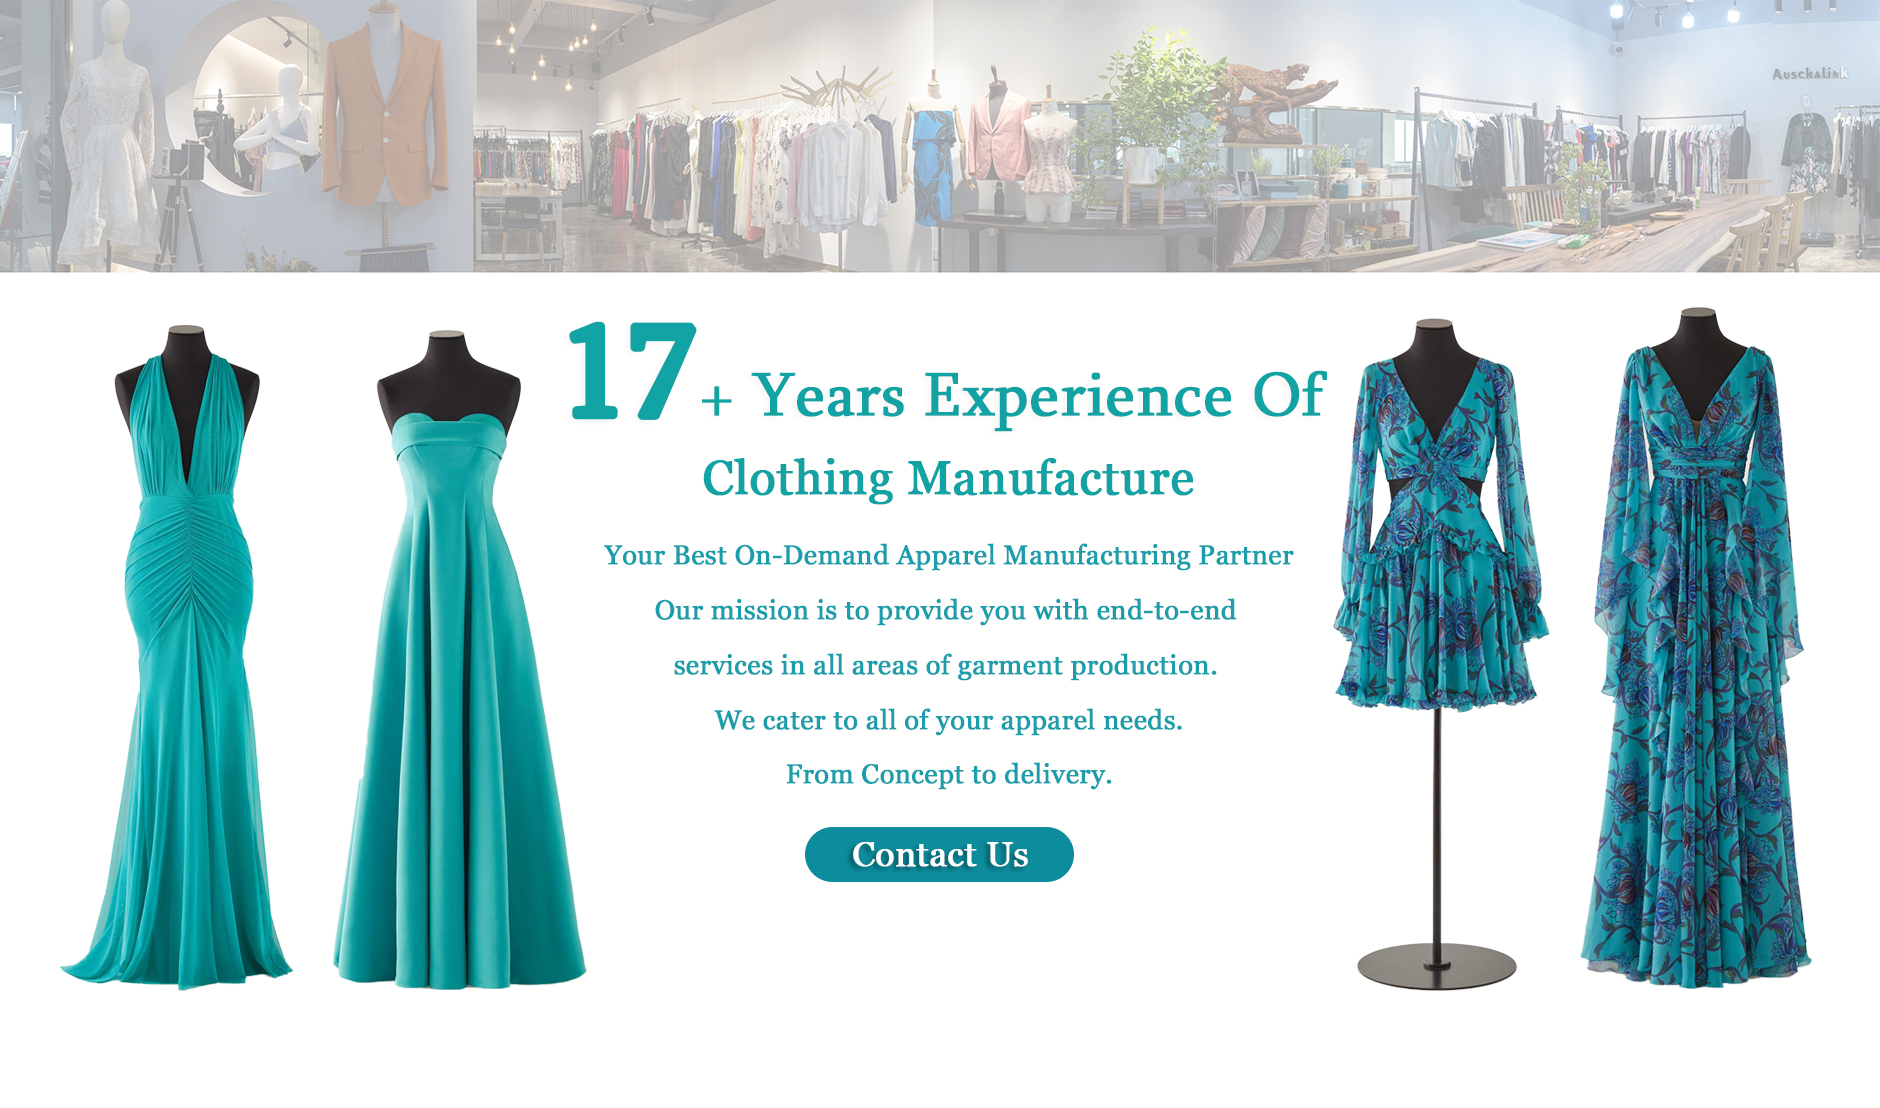 18+ Years Experience Of Clothing Manufacture